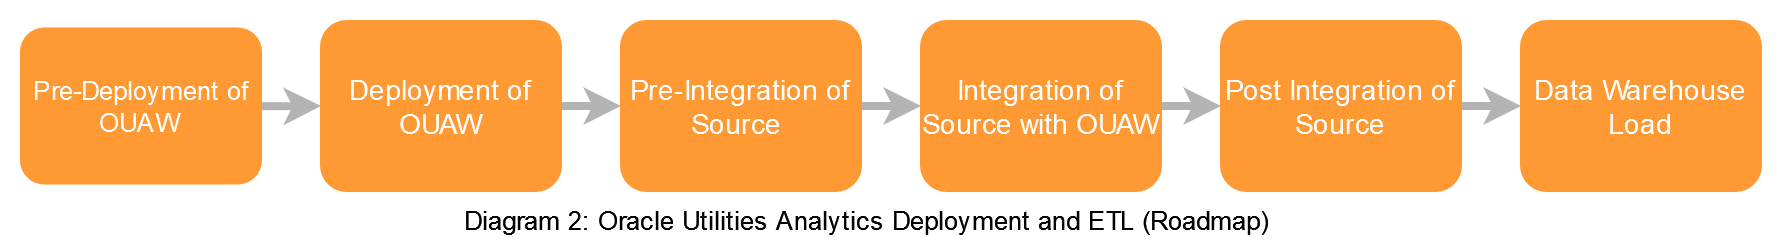 Depicts the conceptual components involved in Oracle Utilities Analytics.